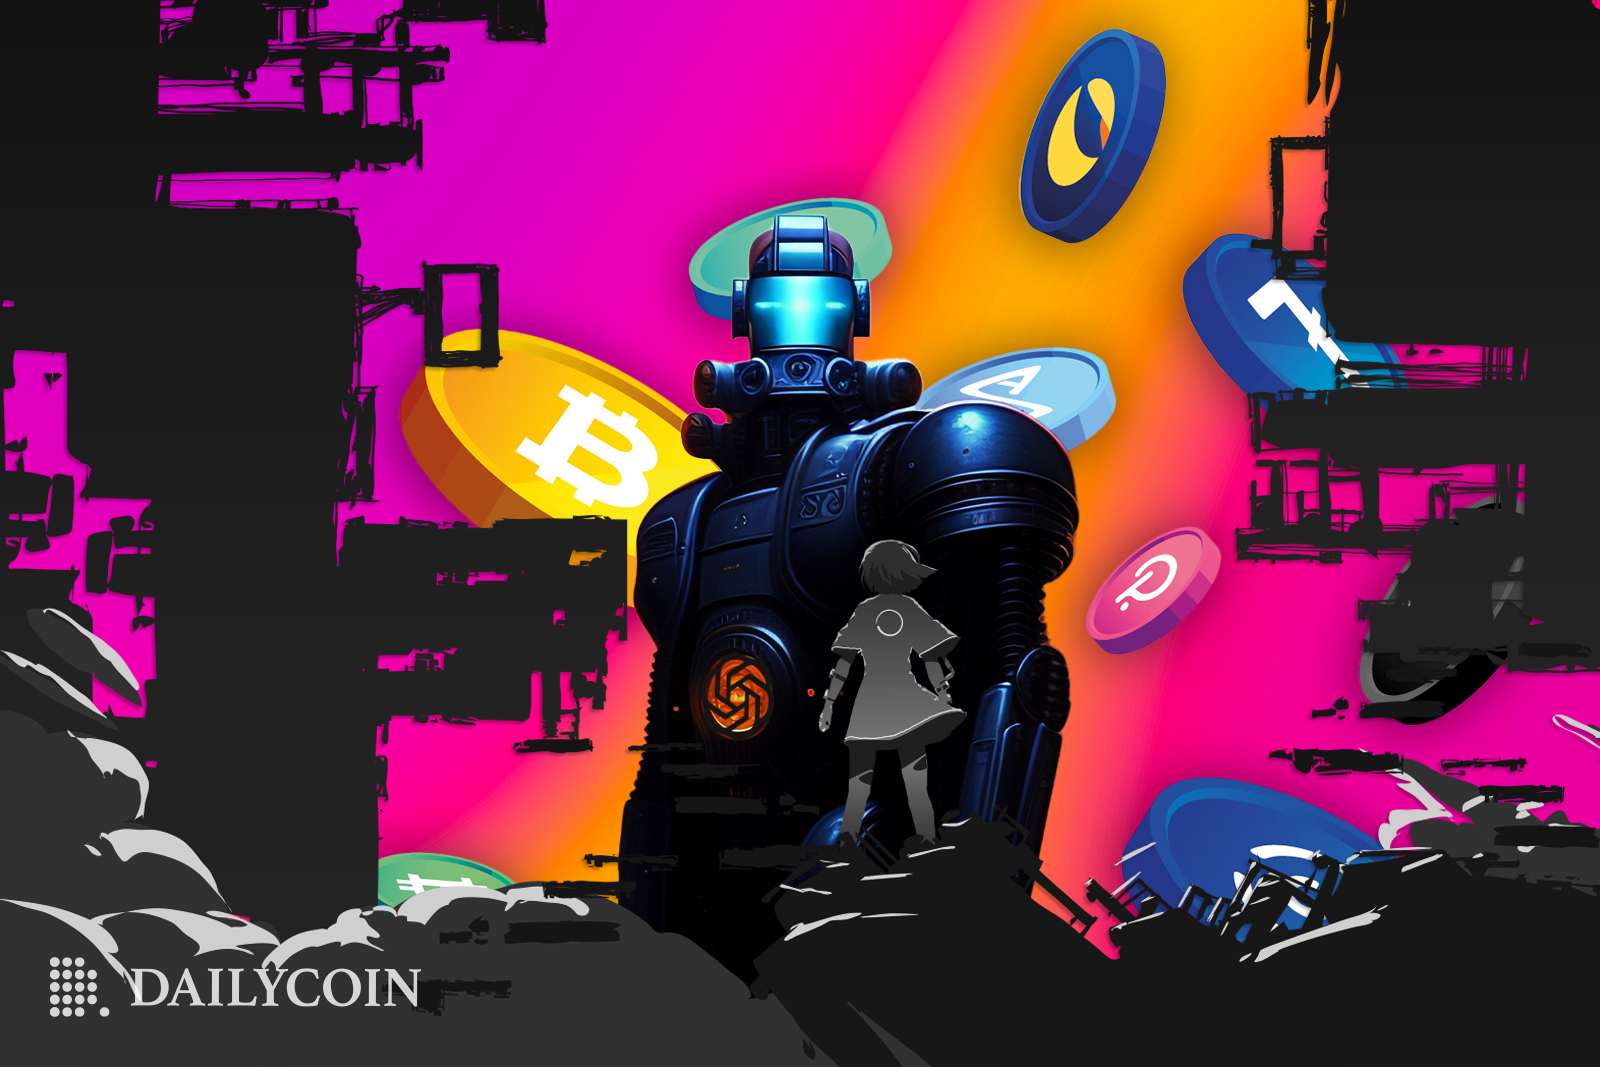 Giant robot standing in front of a human in an abandoned futuristic city next to floating crypto tokens.